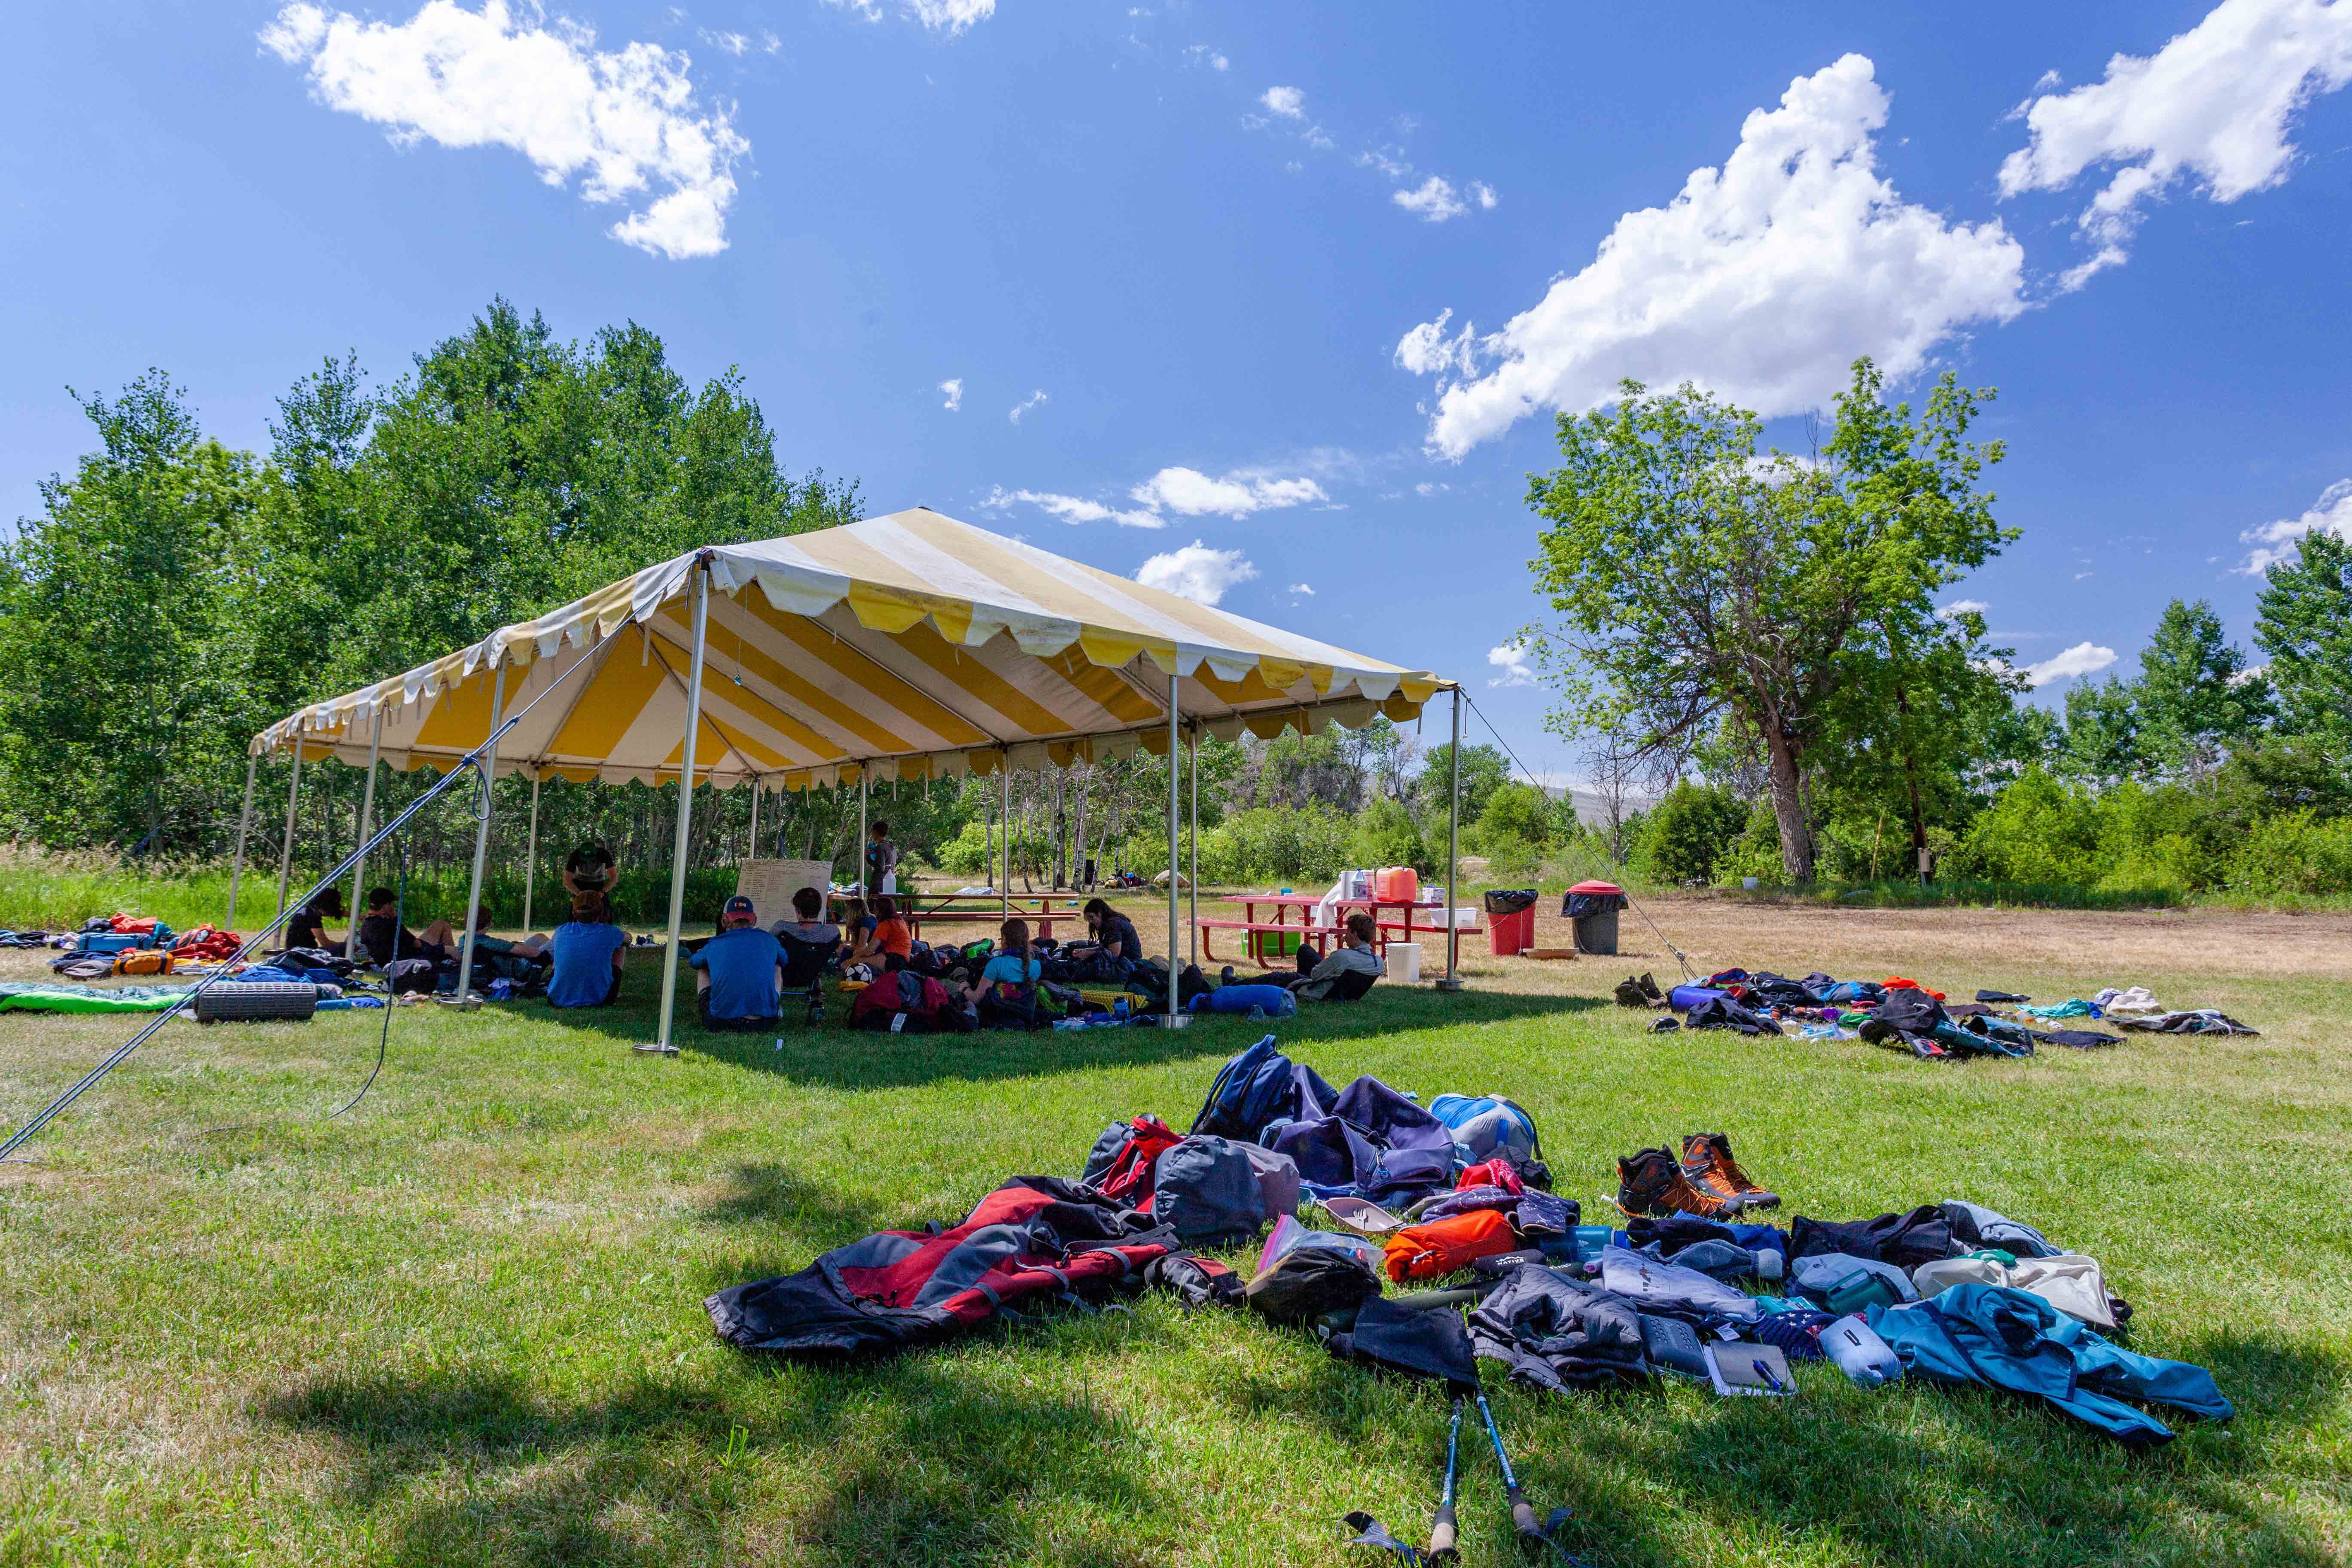 Students sit under a canopy with all of their bags unpacked as they listen to an instructor.